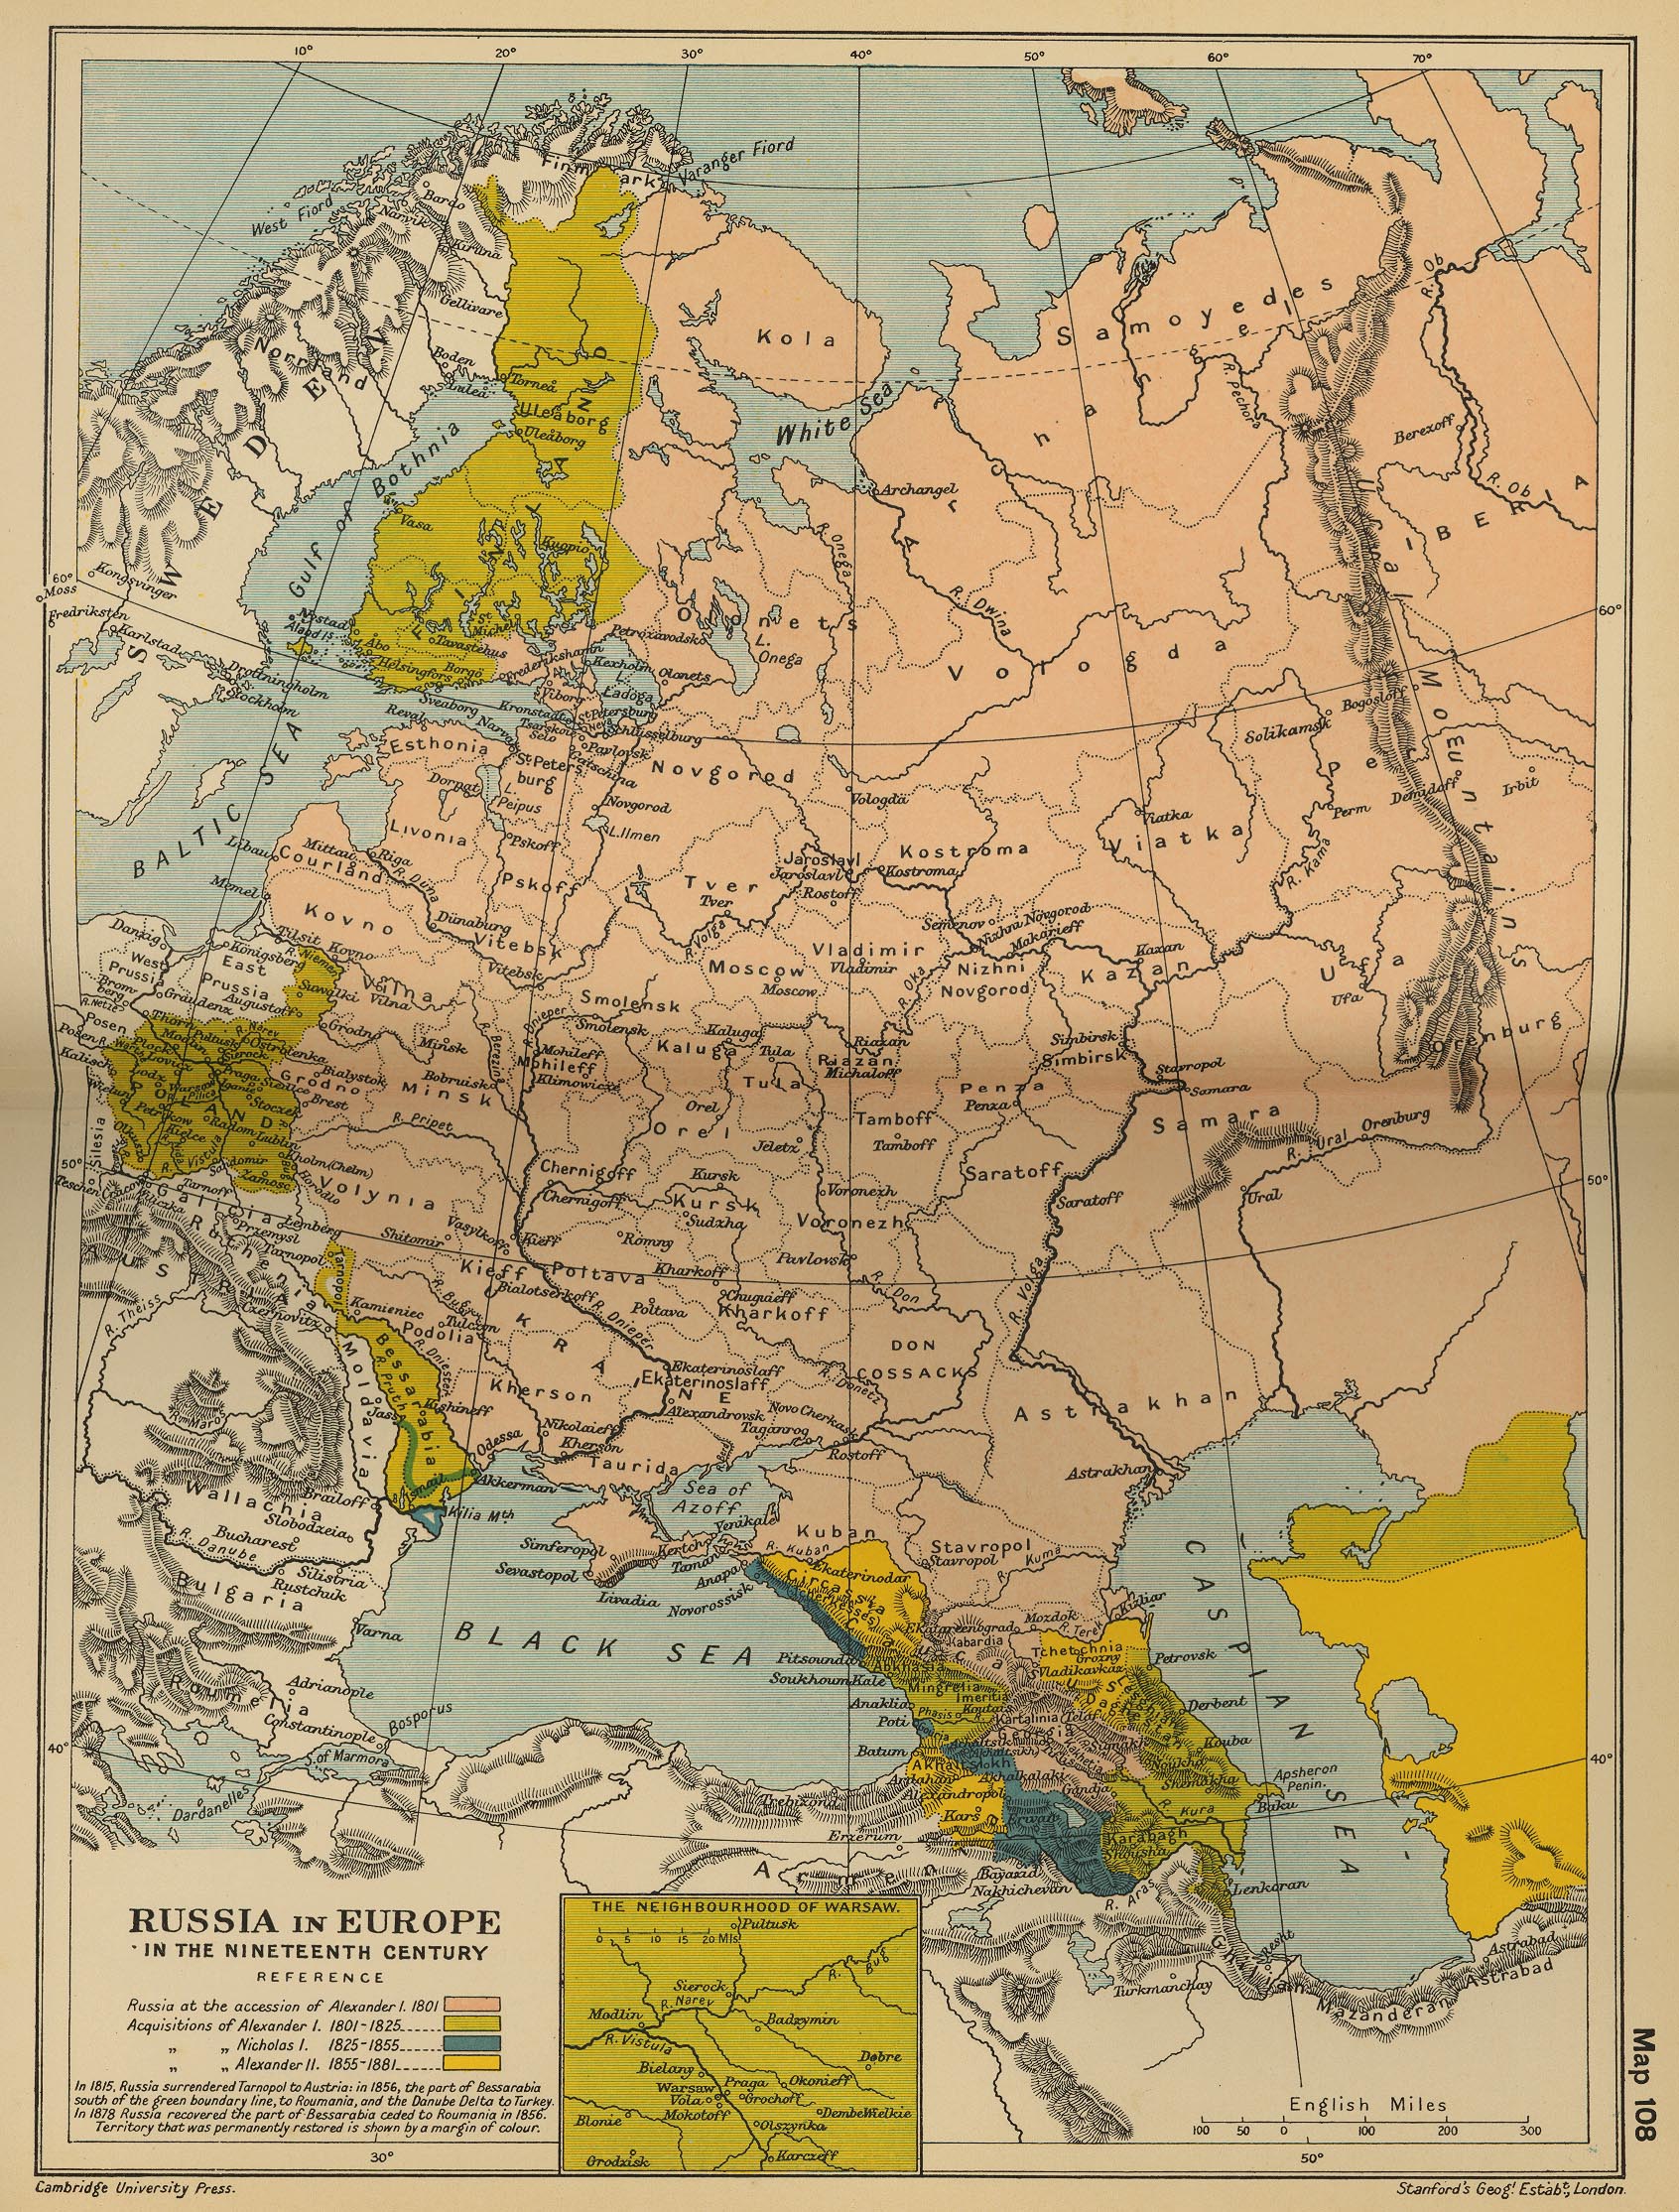 Map of Russia in Europe in the 19th Century